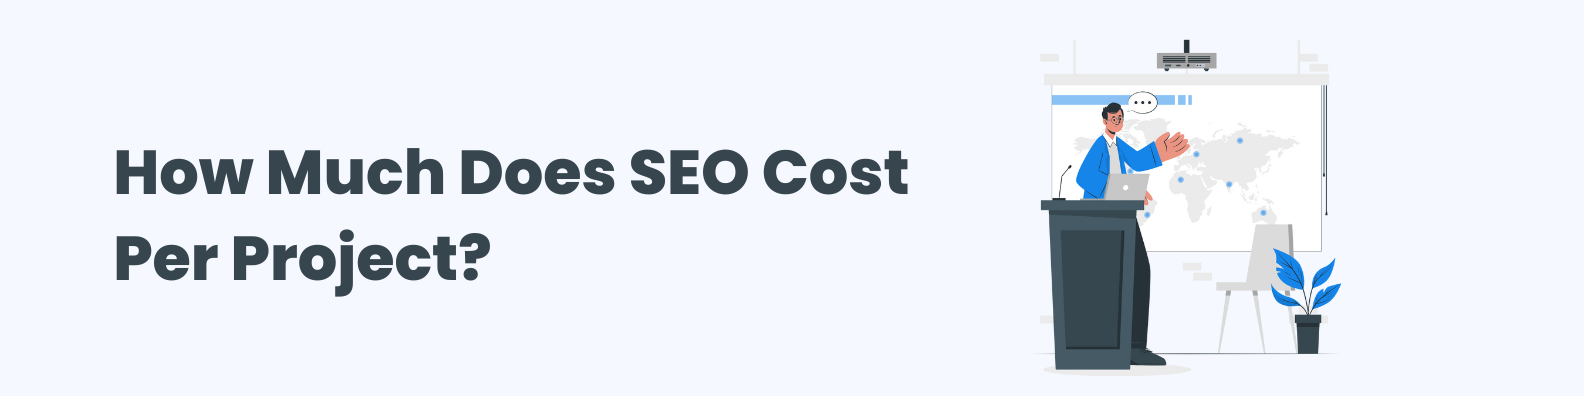 How much does SEO cost per project?